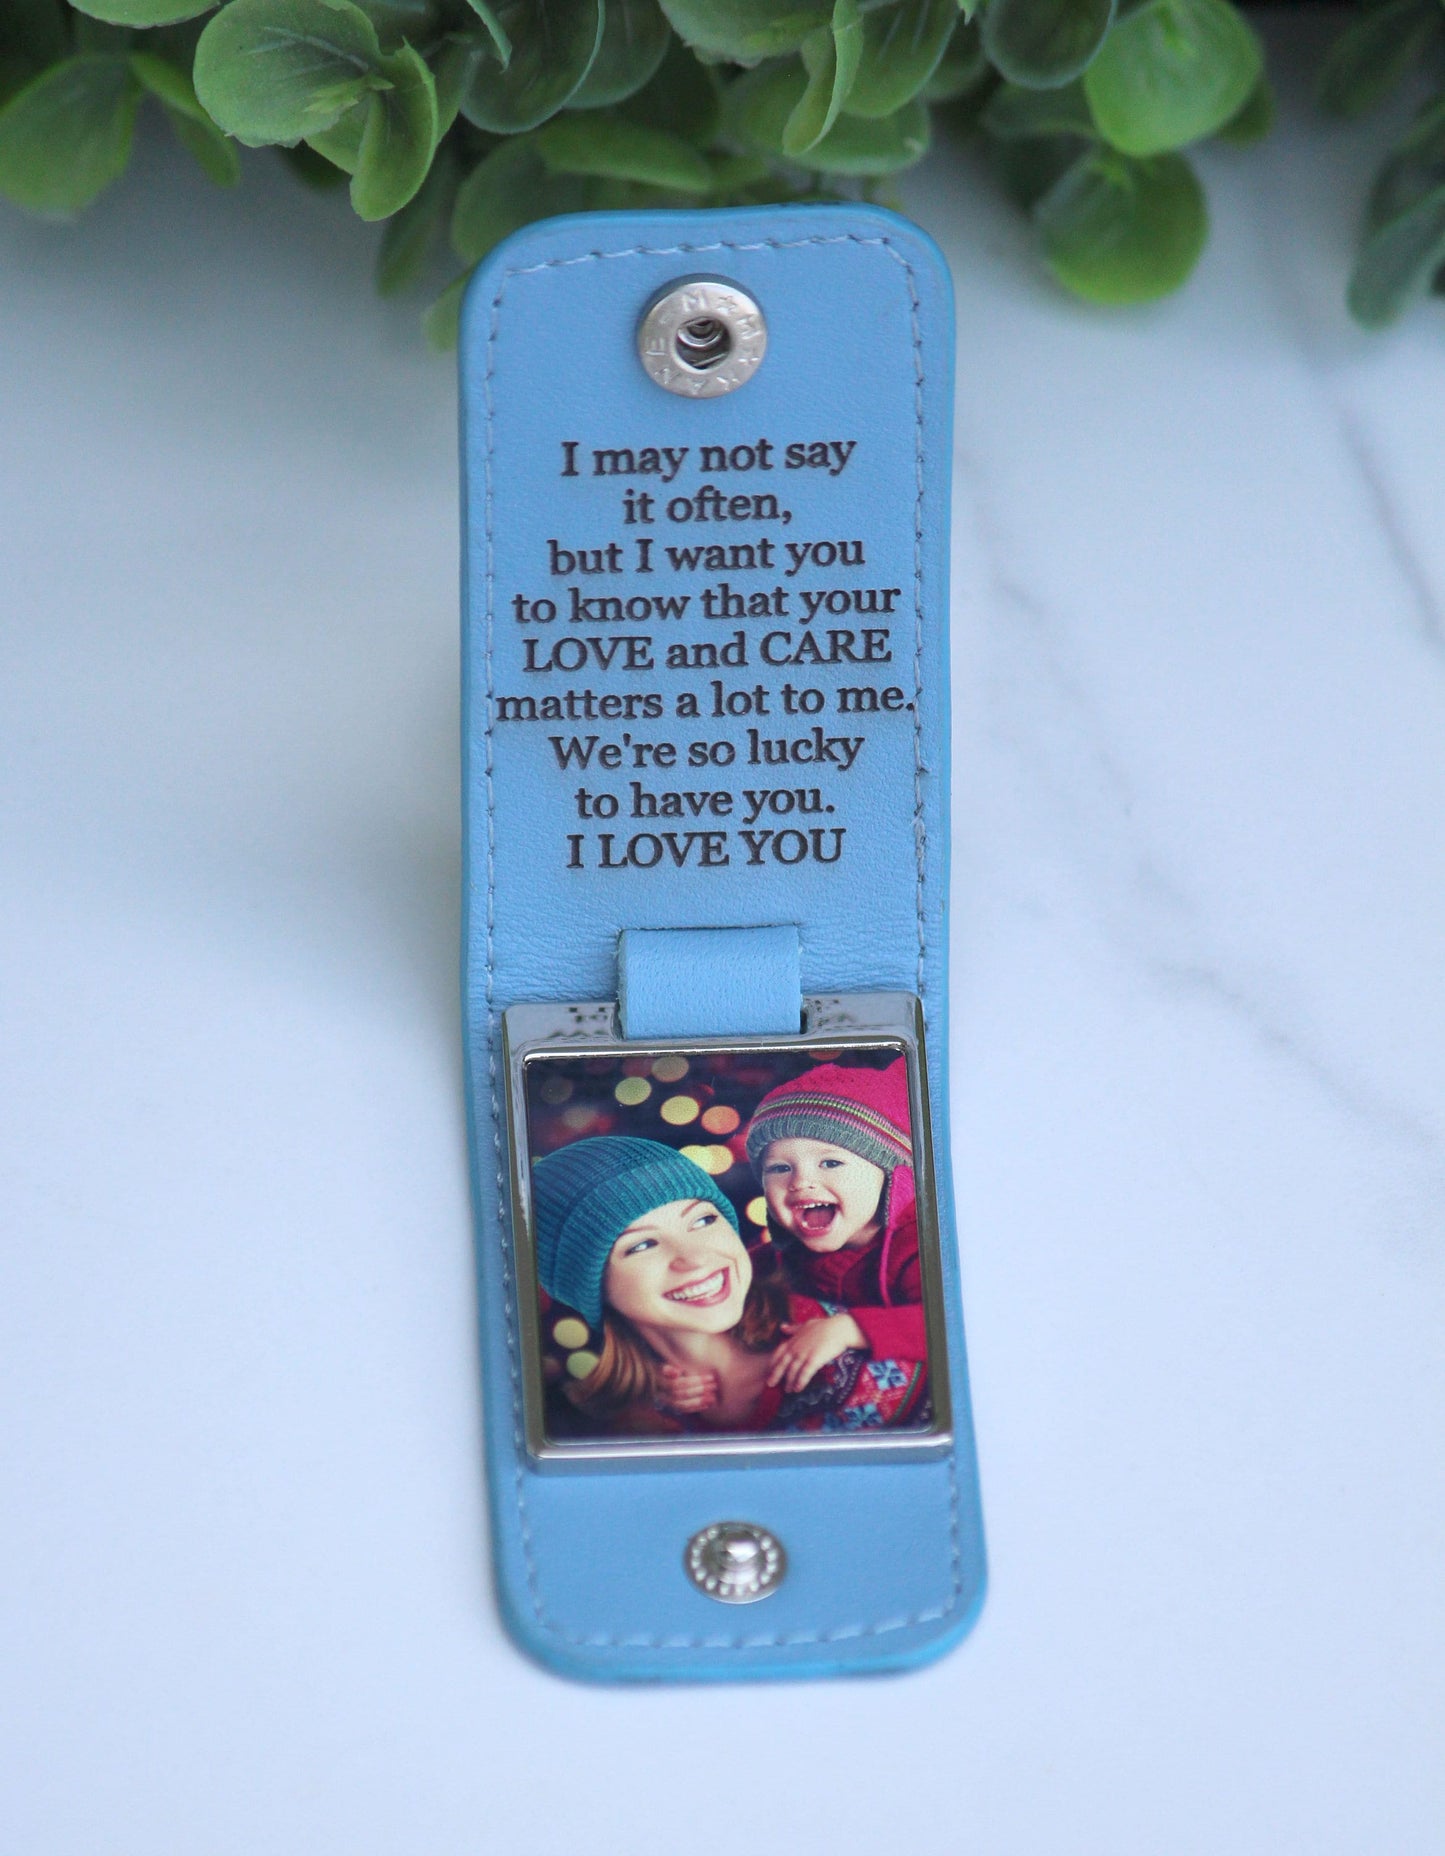 Mothers Day, Fathers Day, Personalized Leather Photo Keychain, Drive Safe, First Time Dad Mom Gift - Birthday, Anniversary, Memorial Gift